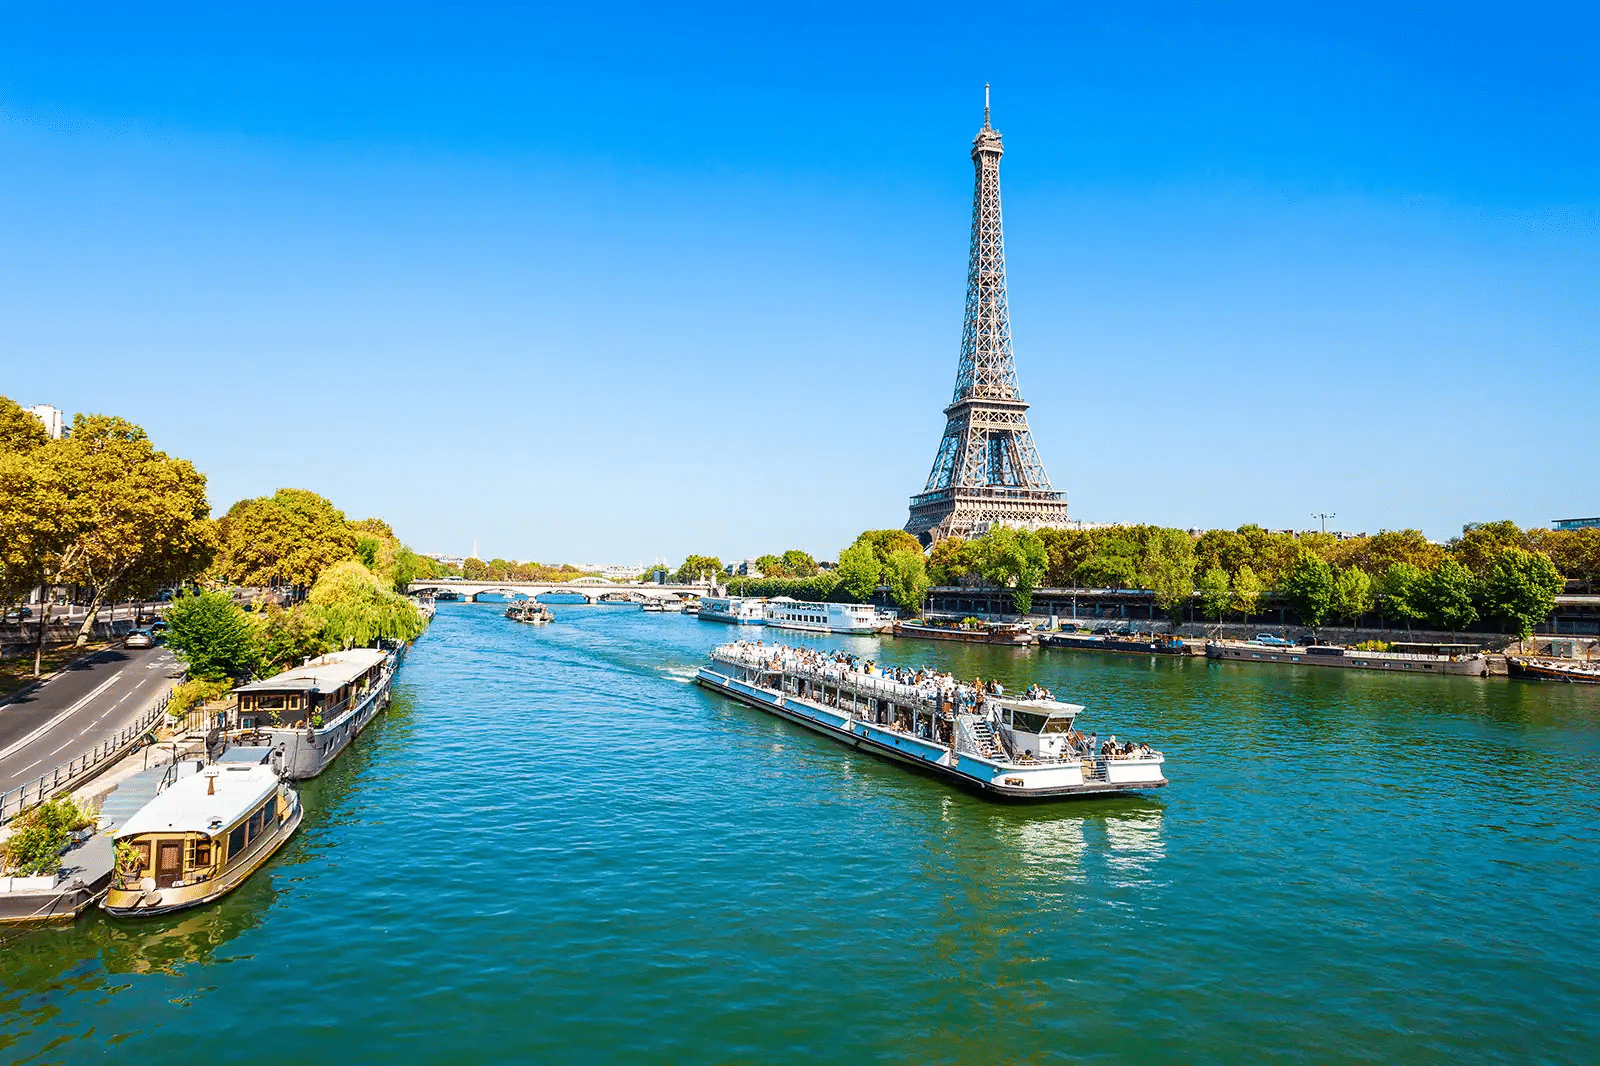 Things to do near eiffel Tower